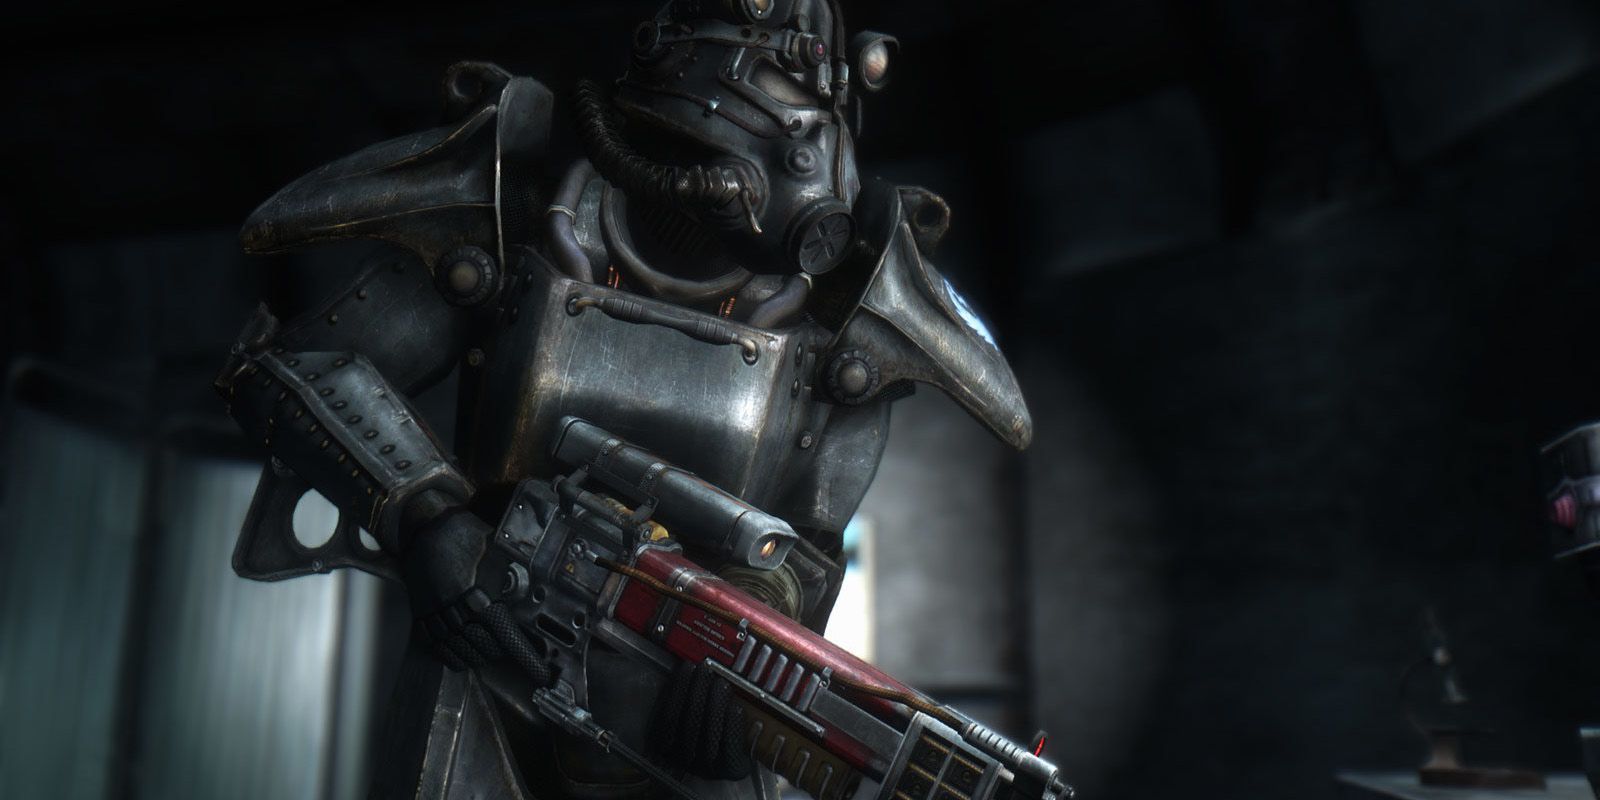 Power armor in Fallout 4